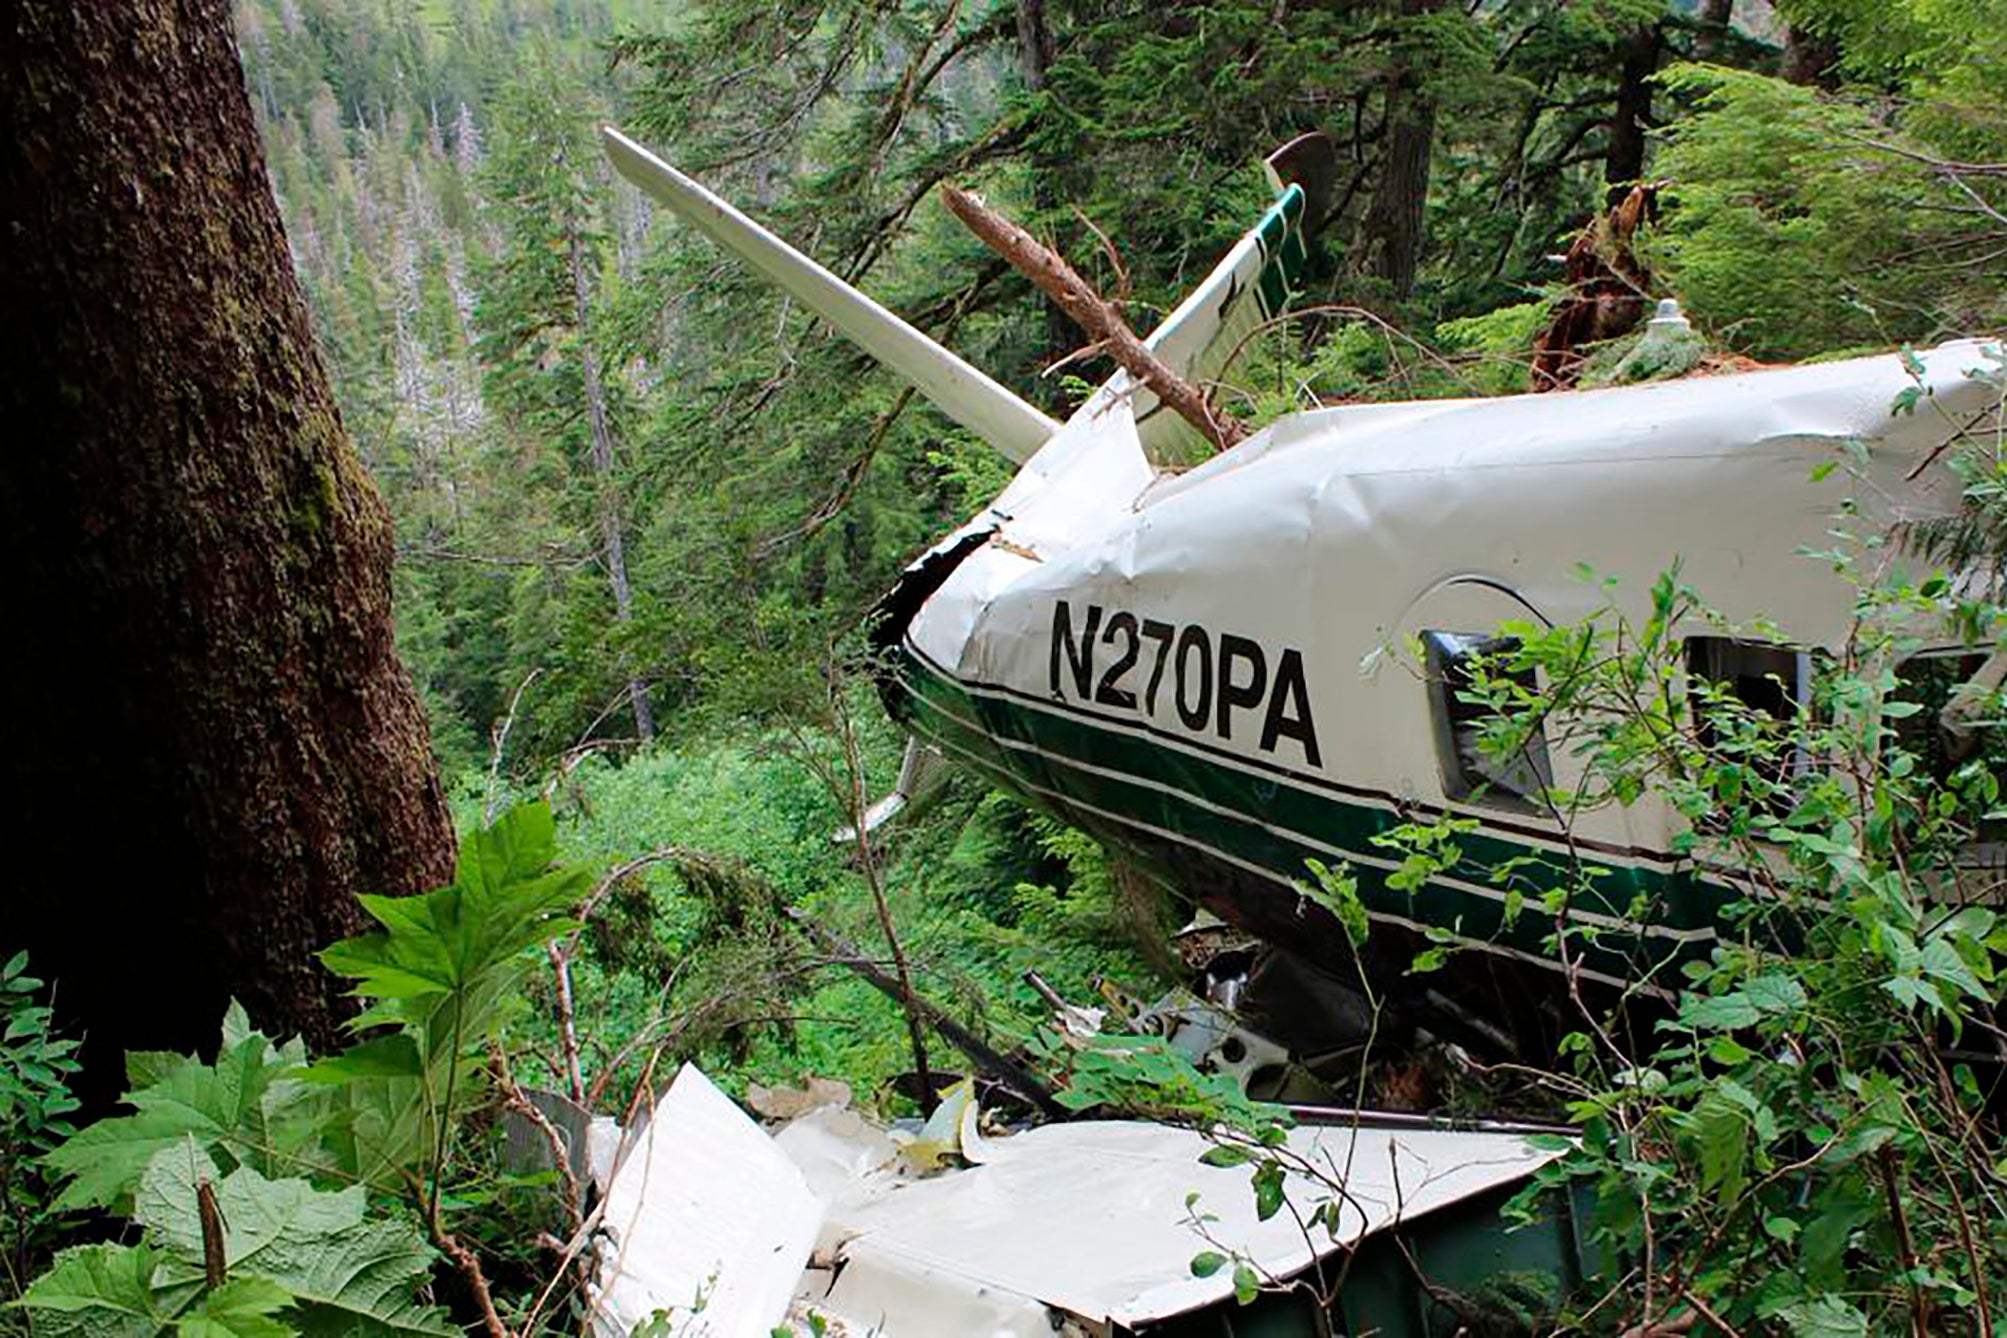 A crashed plane in a forest.